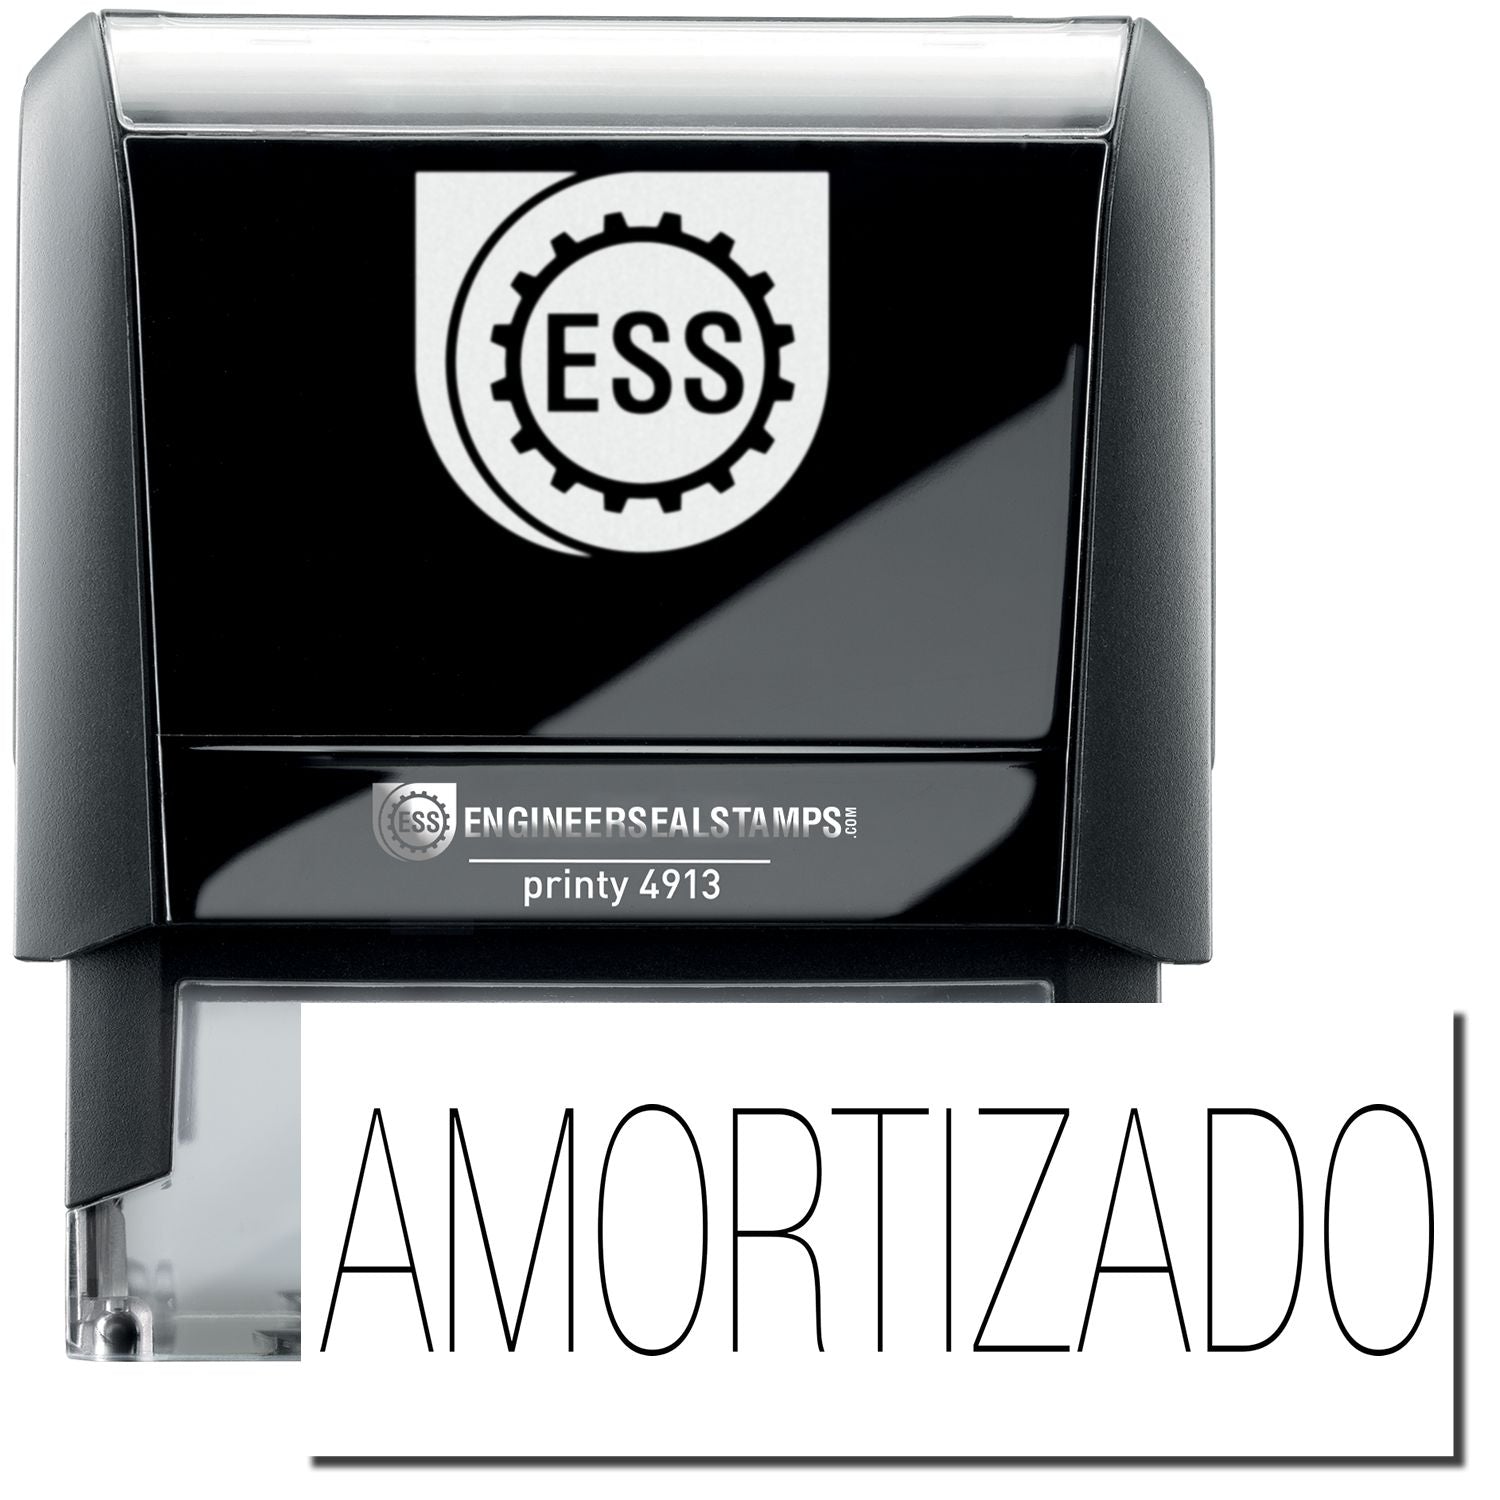 A self-inking stamp with a stamped image showing how the word "AMORTIZADO" in a large font is displayed by it after stamping.